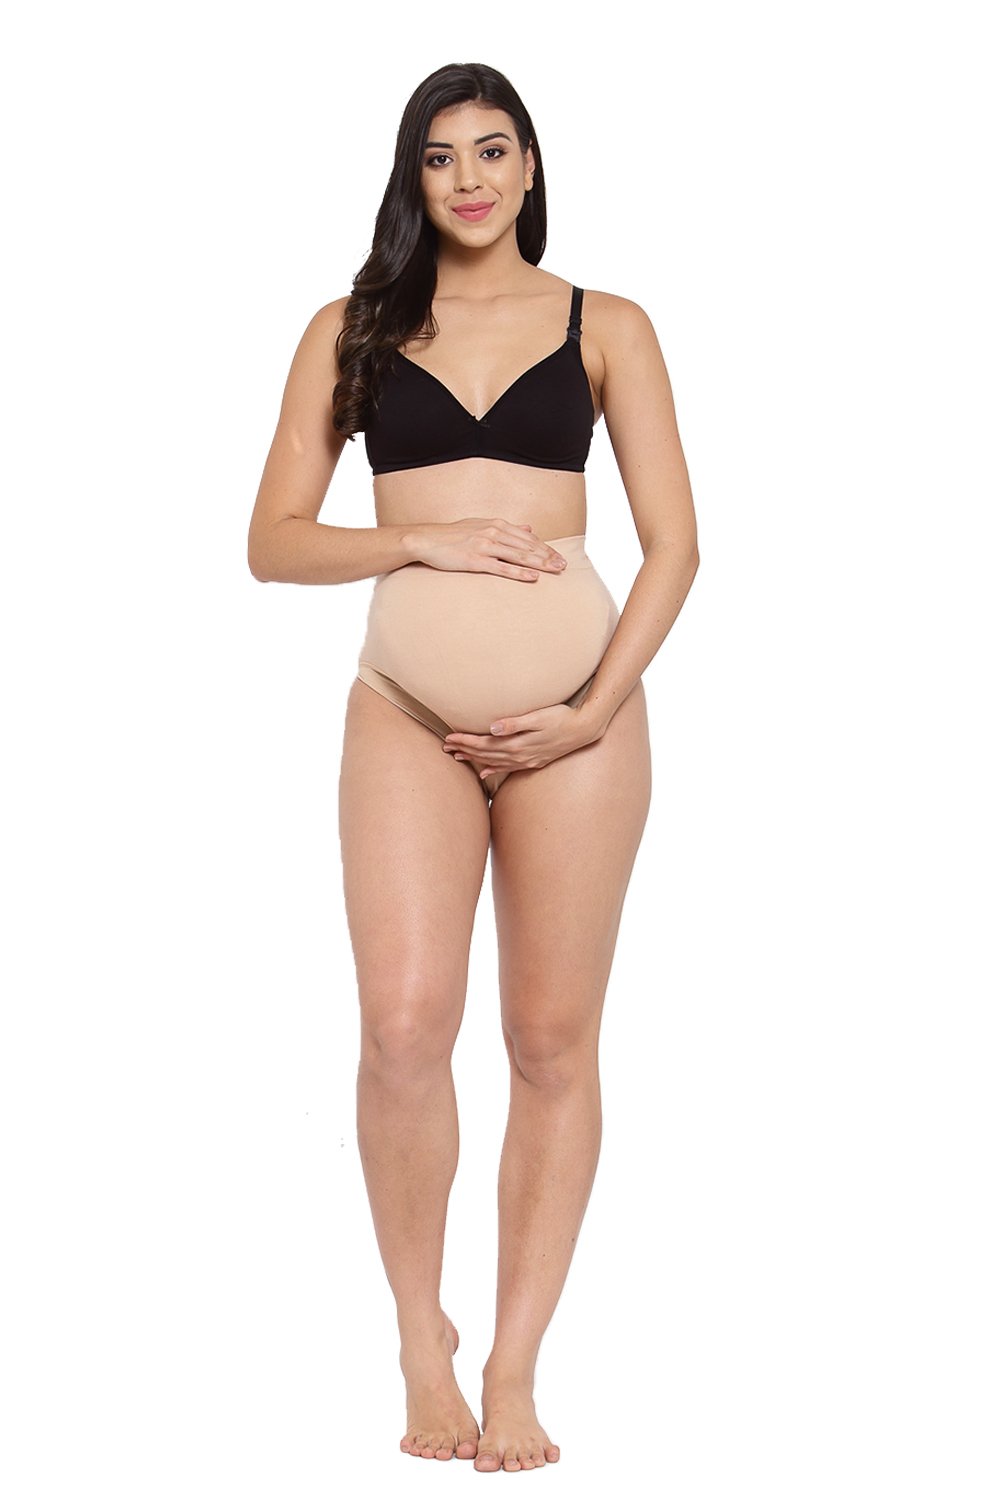 Organic Cotton Antimicrobial Maternity Panty- Pack of 2-IMPC101-Skin_Black-